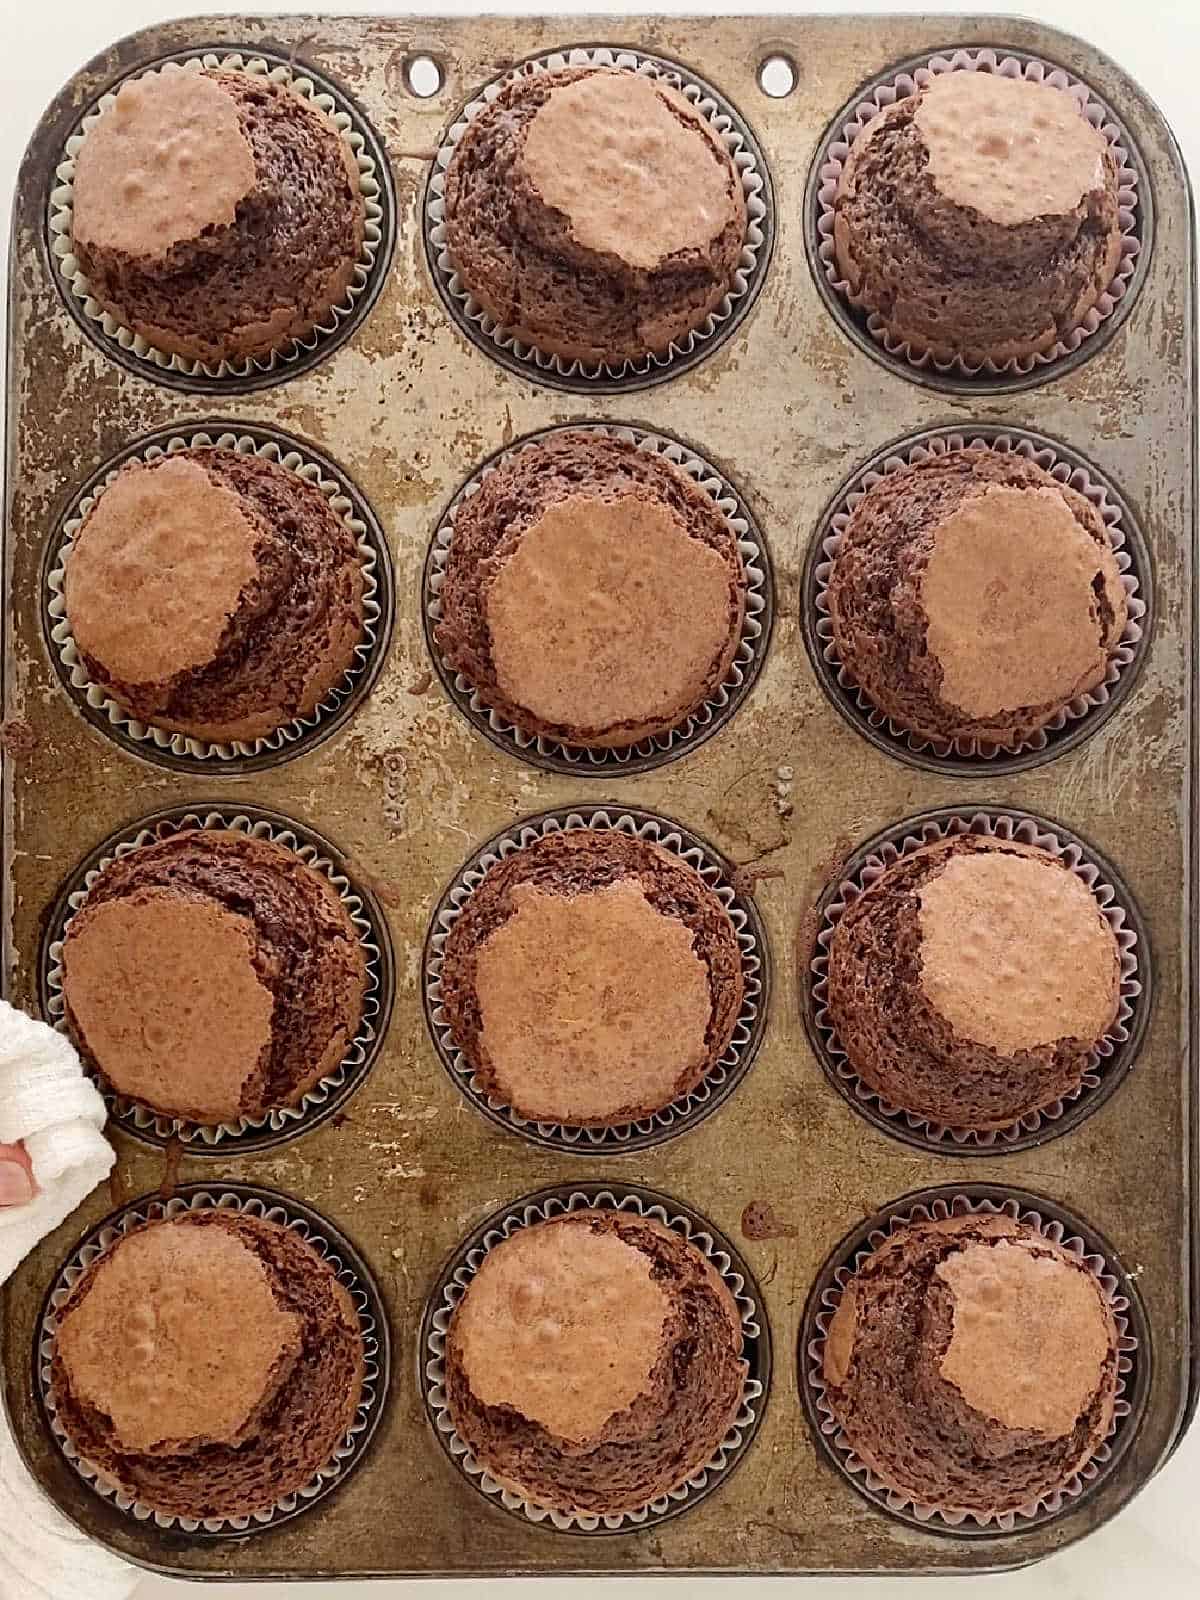 Baked brownie muffins in paper liner in a vintage muffin pan.